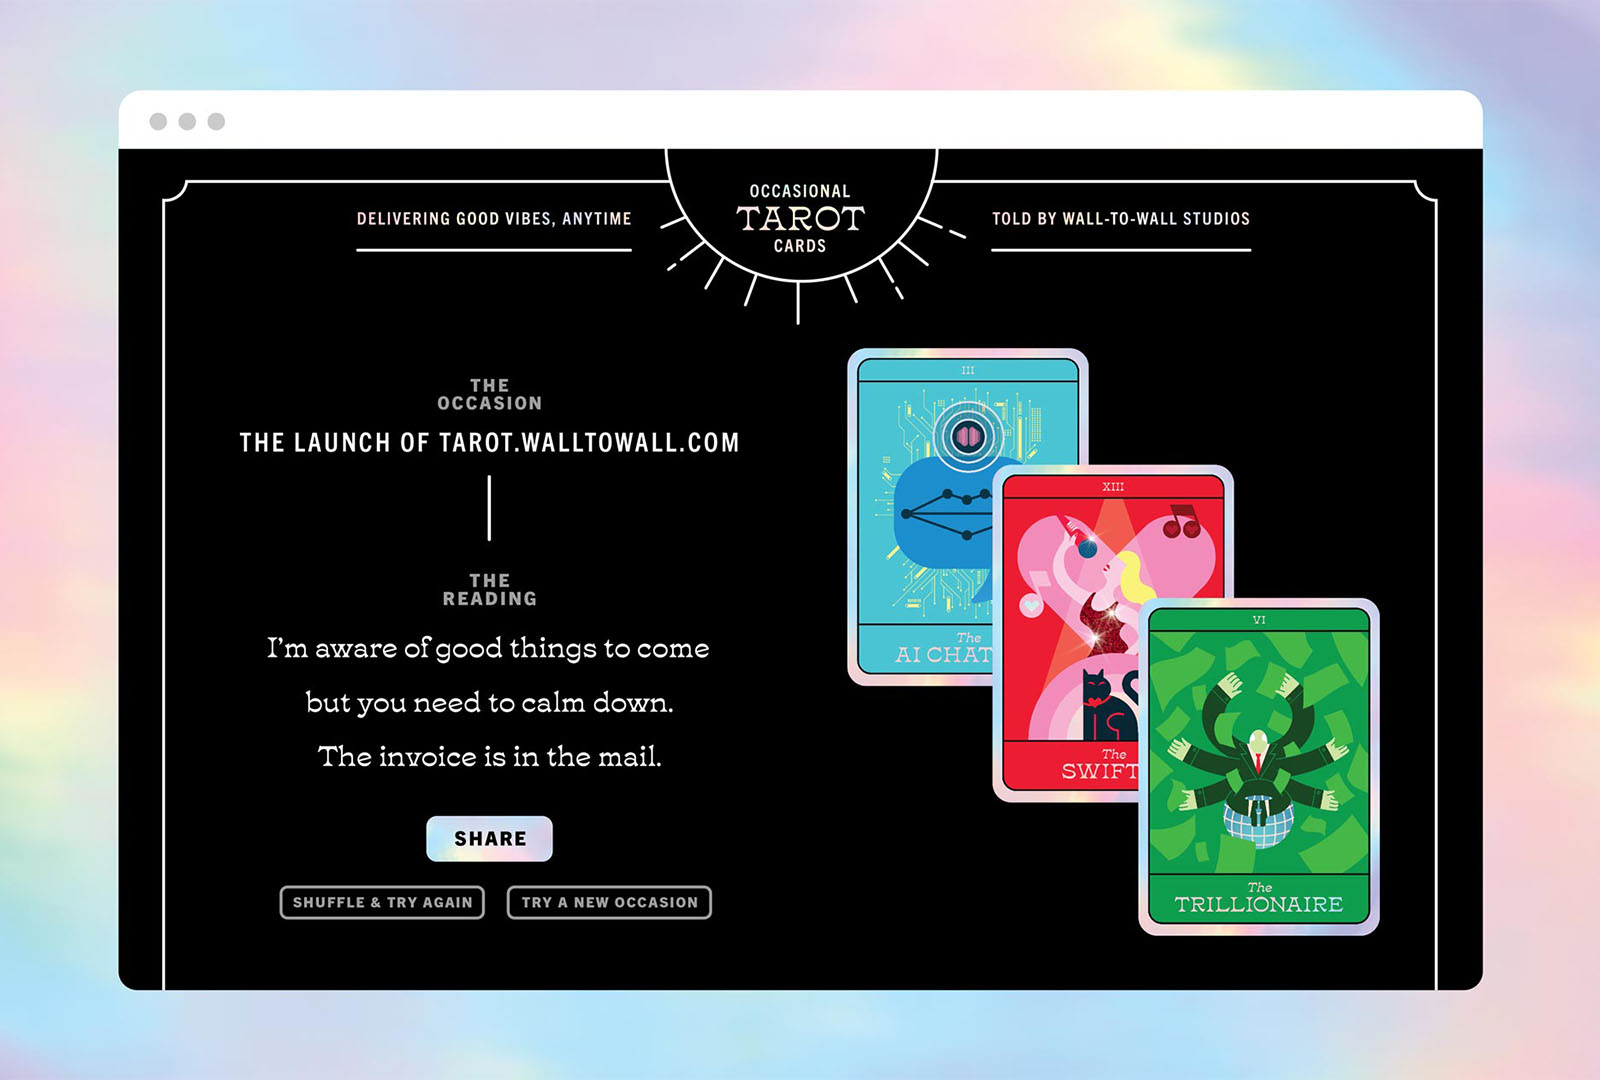 The Occasional Tarot Card website was honored with a silver ADDY award.